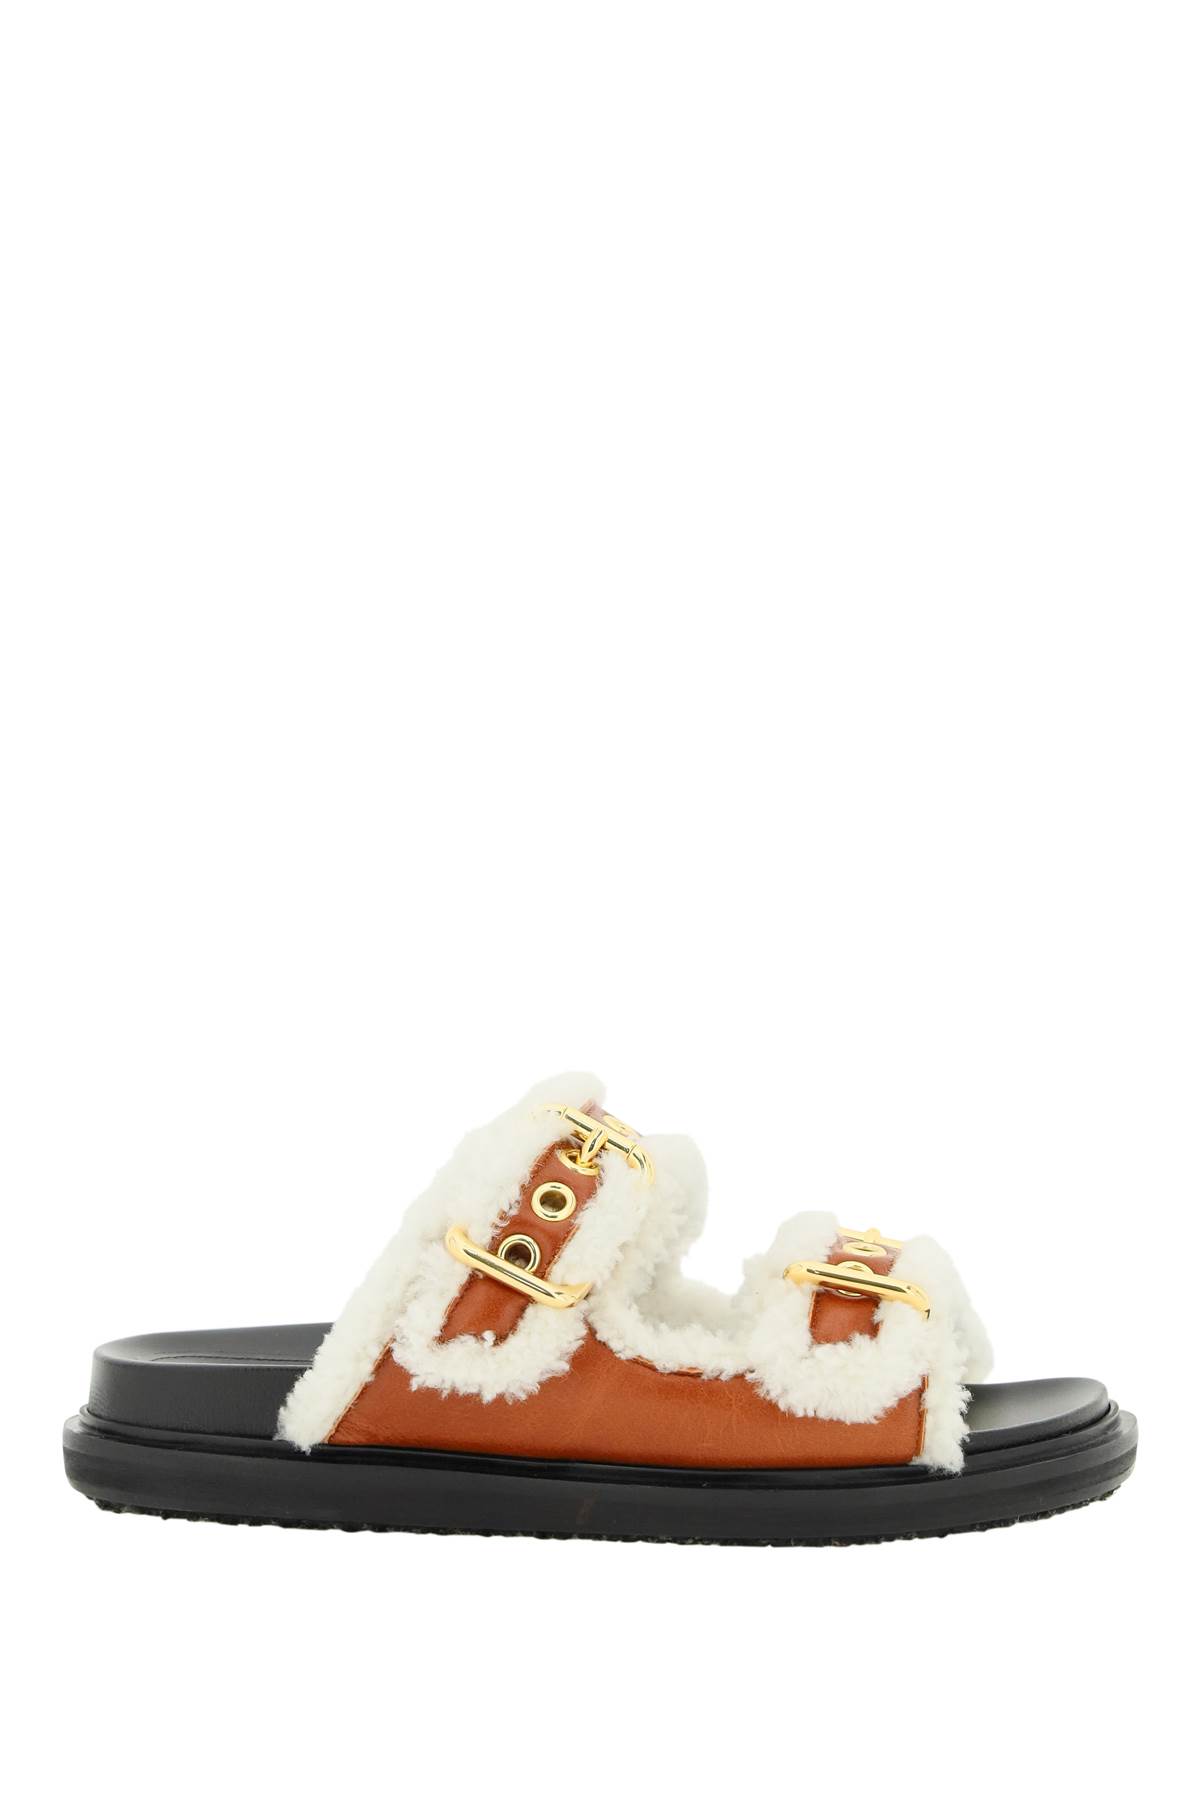 MARNI LEATHER AND SHEARLING FUSSBETT SLIDES